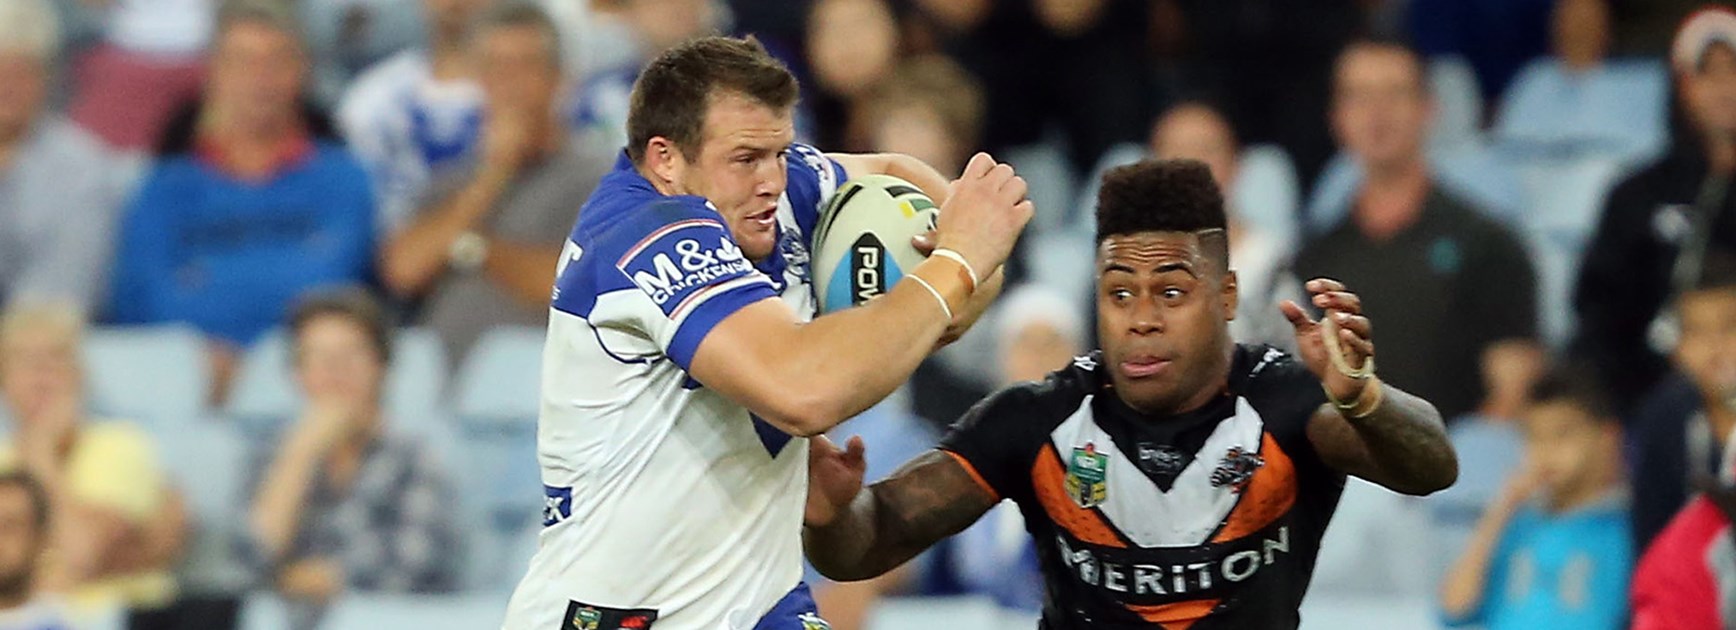 Bulldogs centre Josh Morris broke his try-scoring drought in a Round 4 win over Wests Tigers.